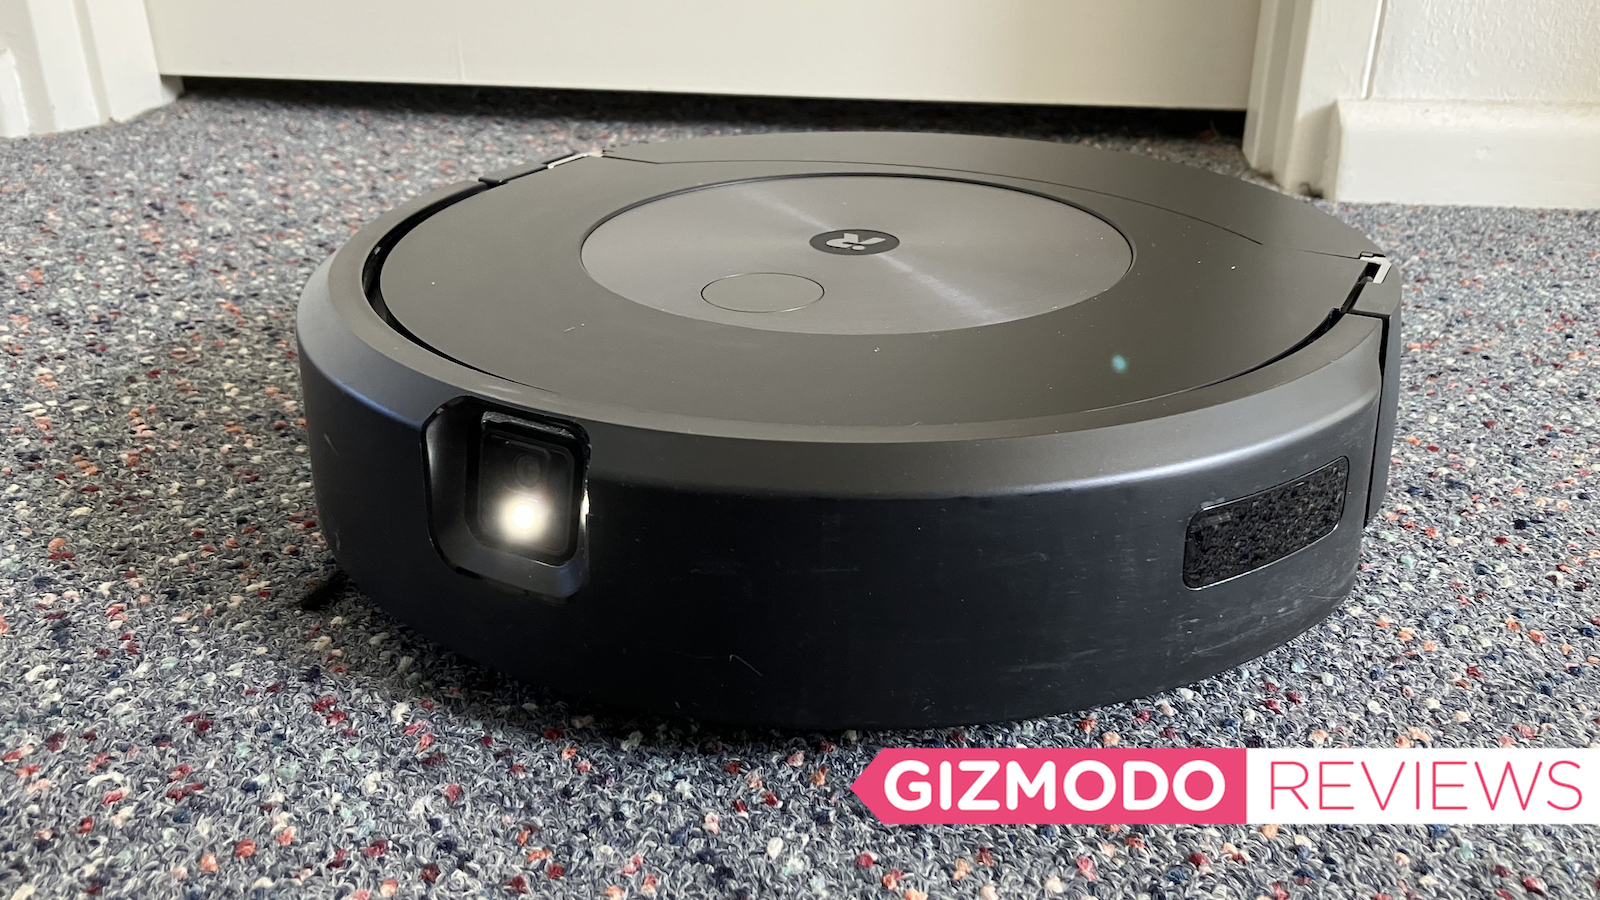 The Roomba i7+ is the robot vacuum I've been waiting for